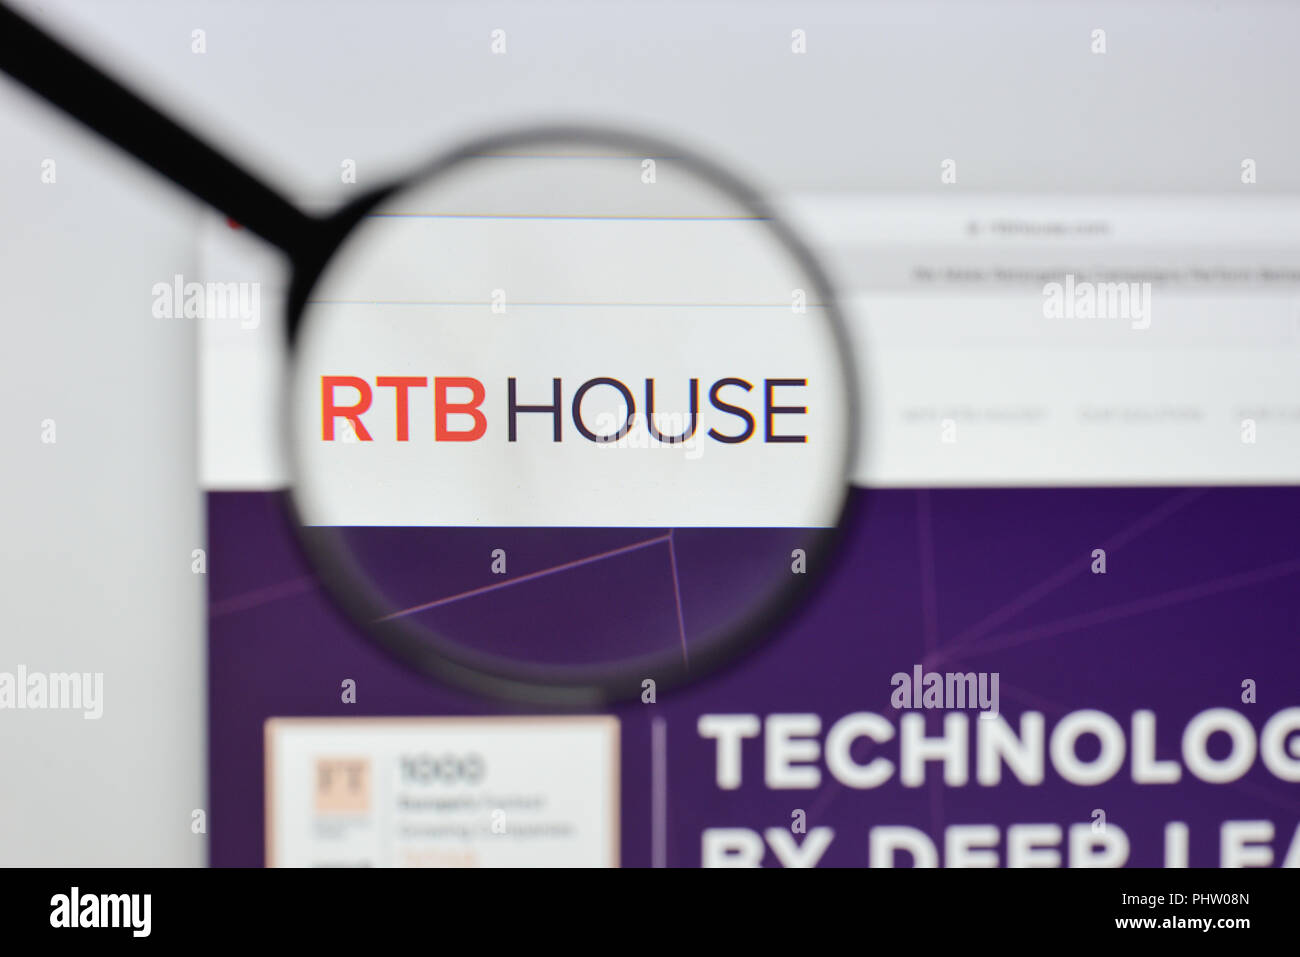 Milan, Italy - August 20, 2018: RTB House website homepage. RTB House logo visible. Stock Photo